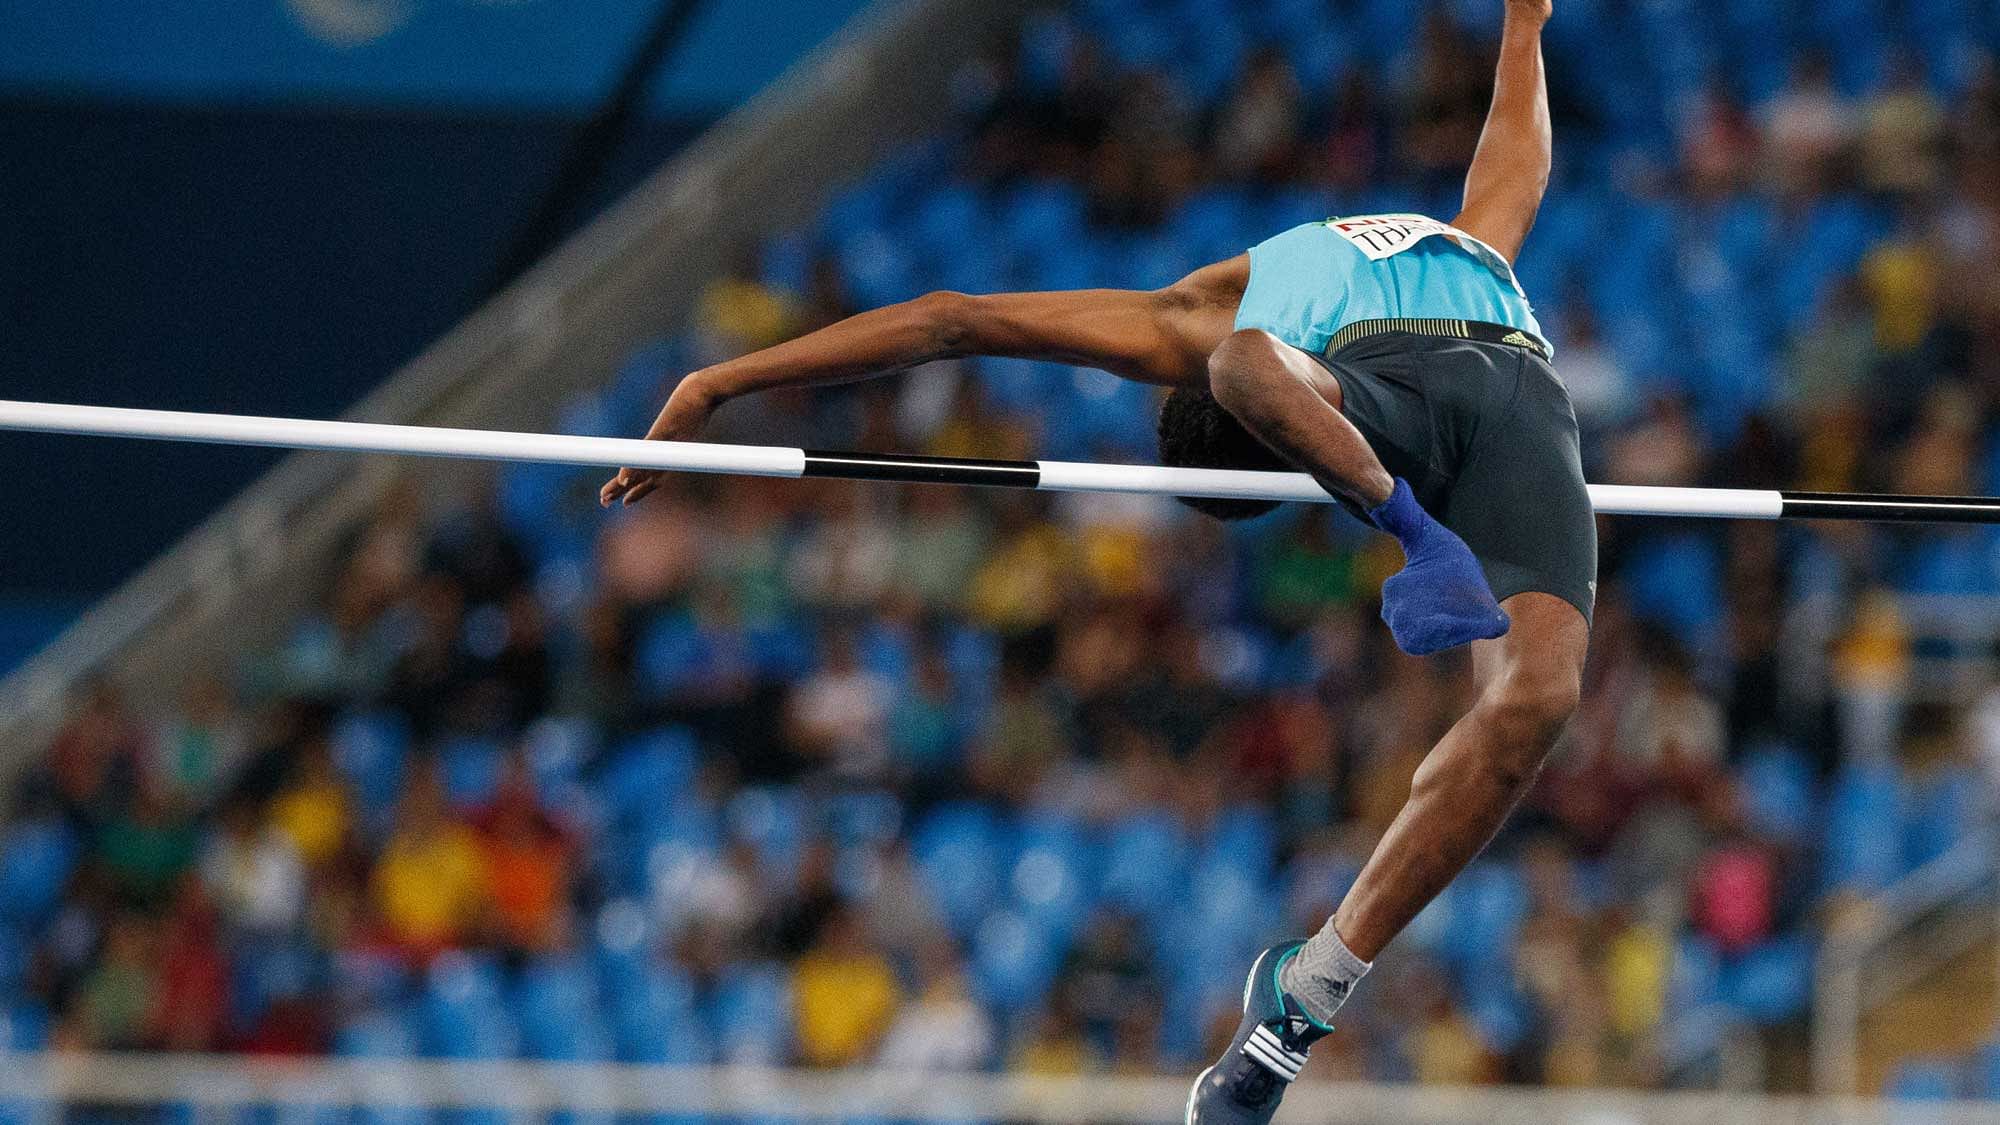 India’s Mariyappan Thangavelu jumps to win the gold in the men’s final high jump T42 event at Olympic Stadium during the Paralympic Games. (Photo: AP)<a></a>